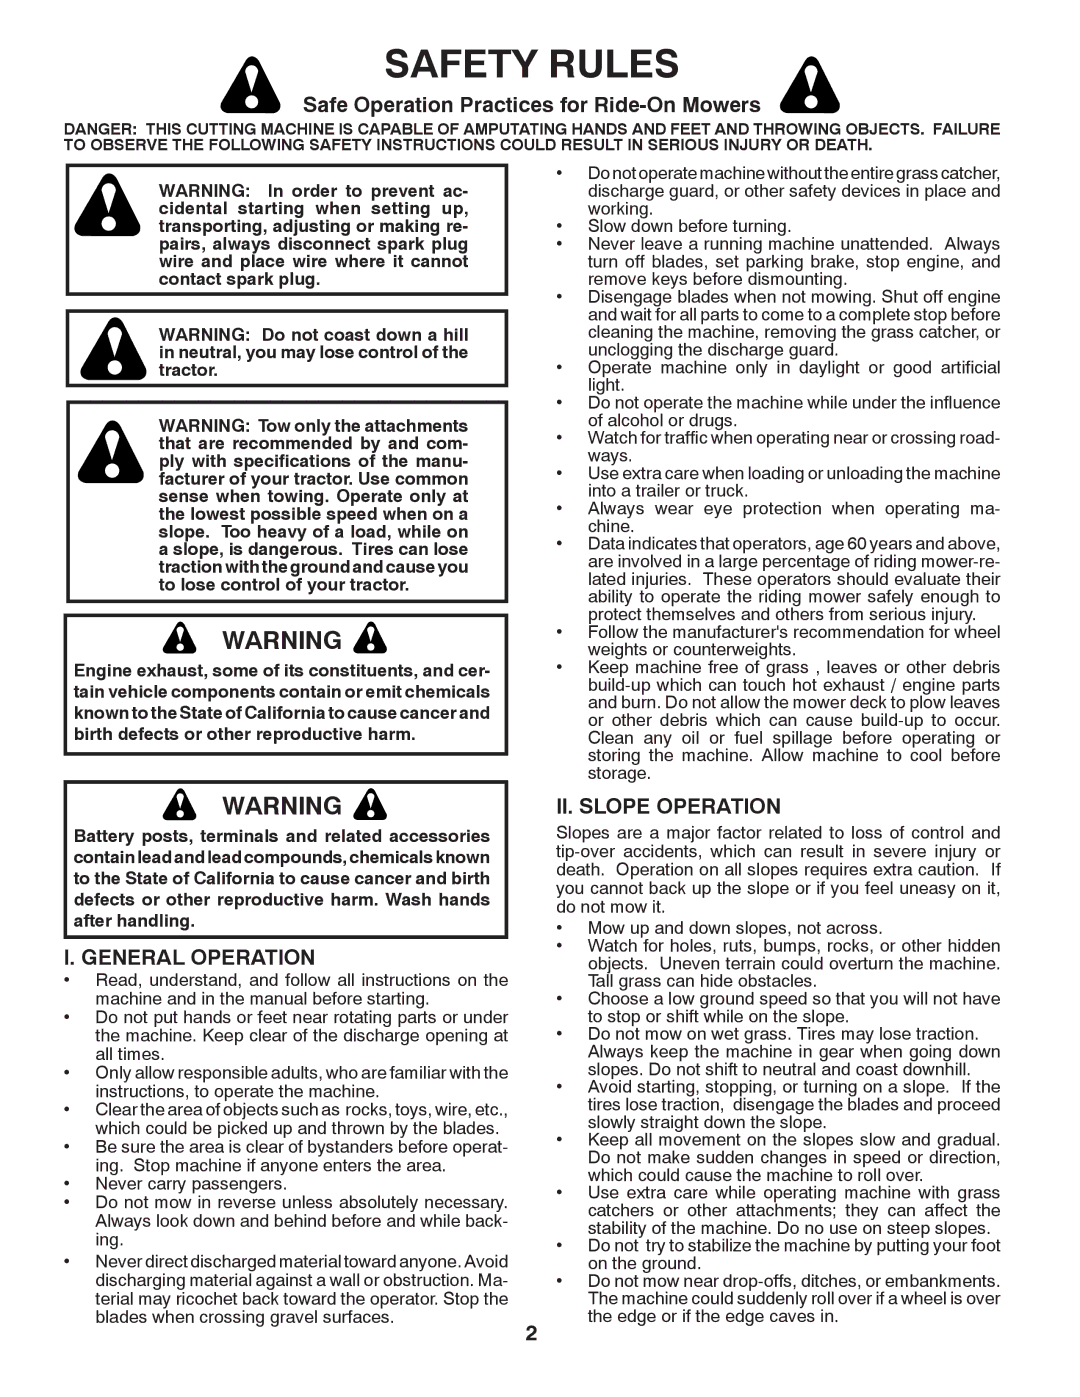 Poulan 411259 manual Safety Rules, Safe Operation Practices for Ride-On Mowers, General Operation, II. Slope Operation 